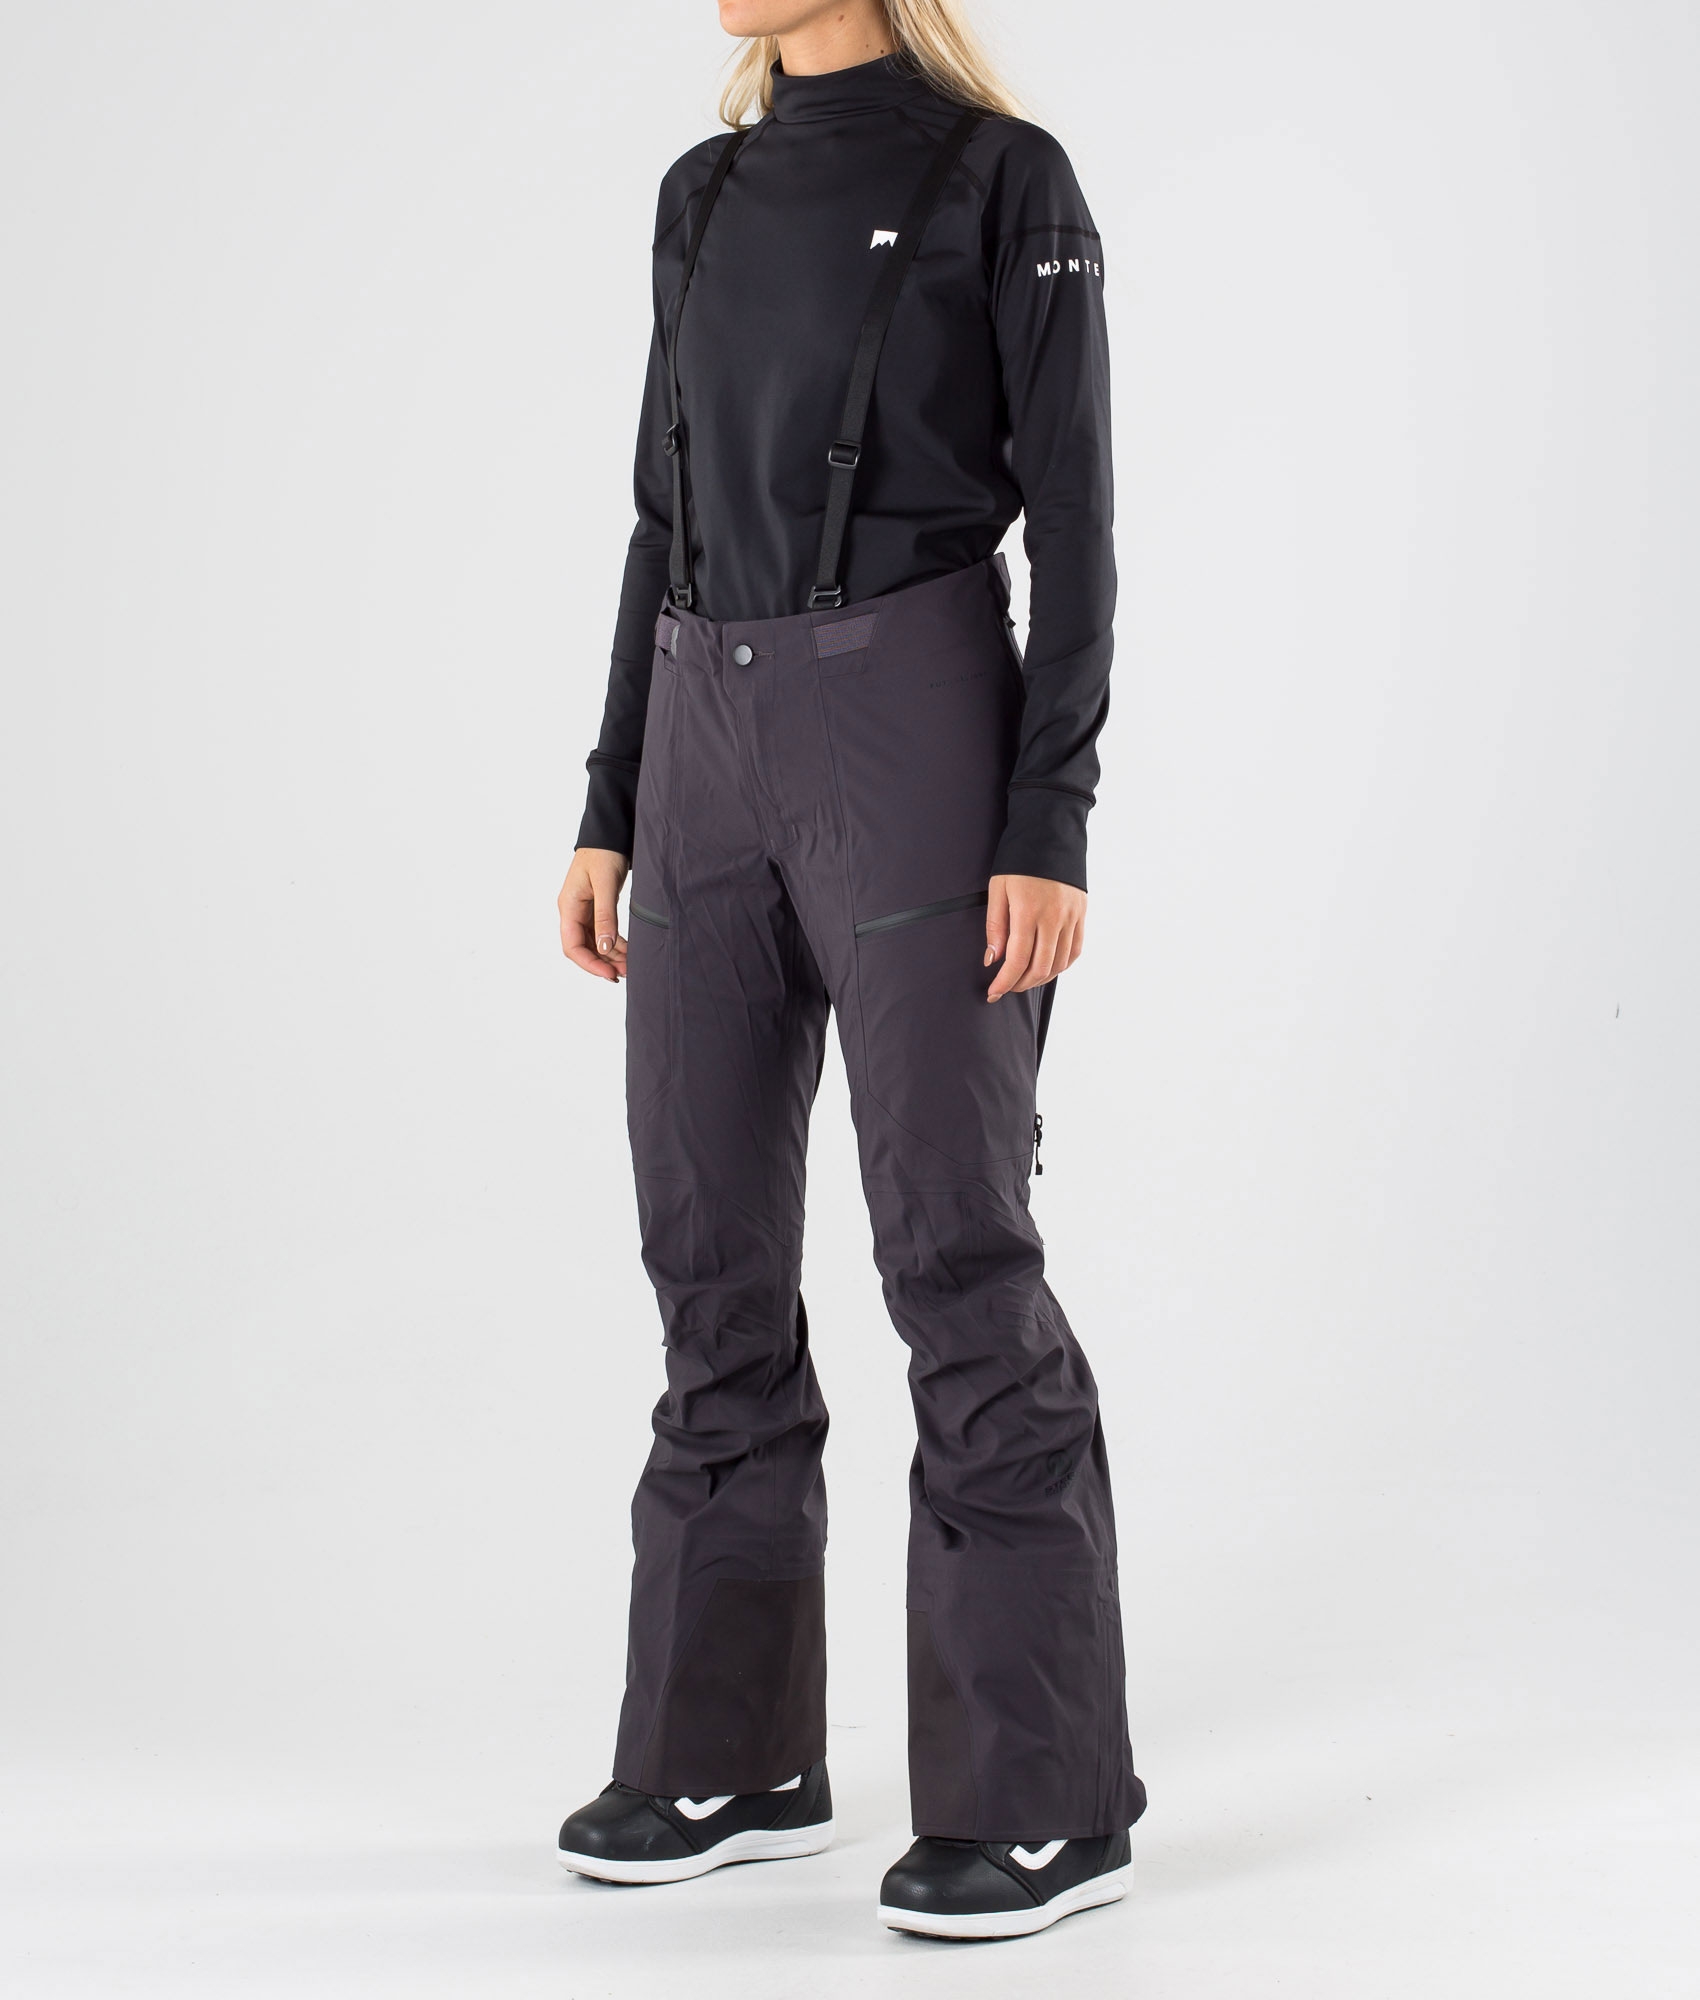 north face free thinker pants